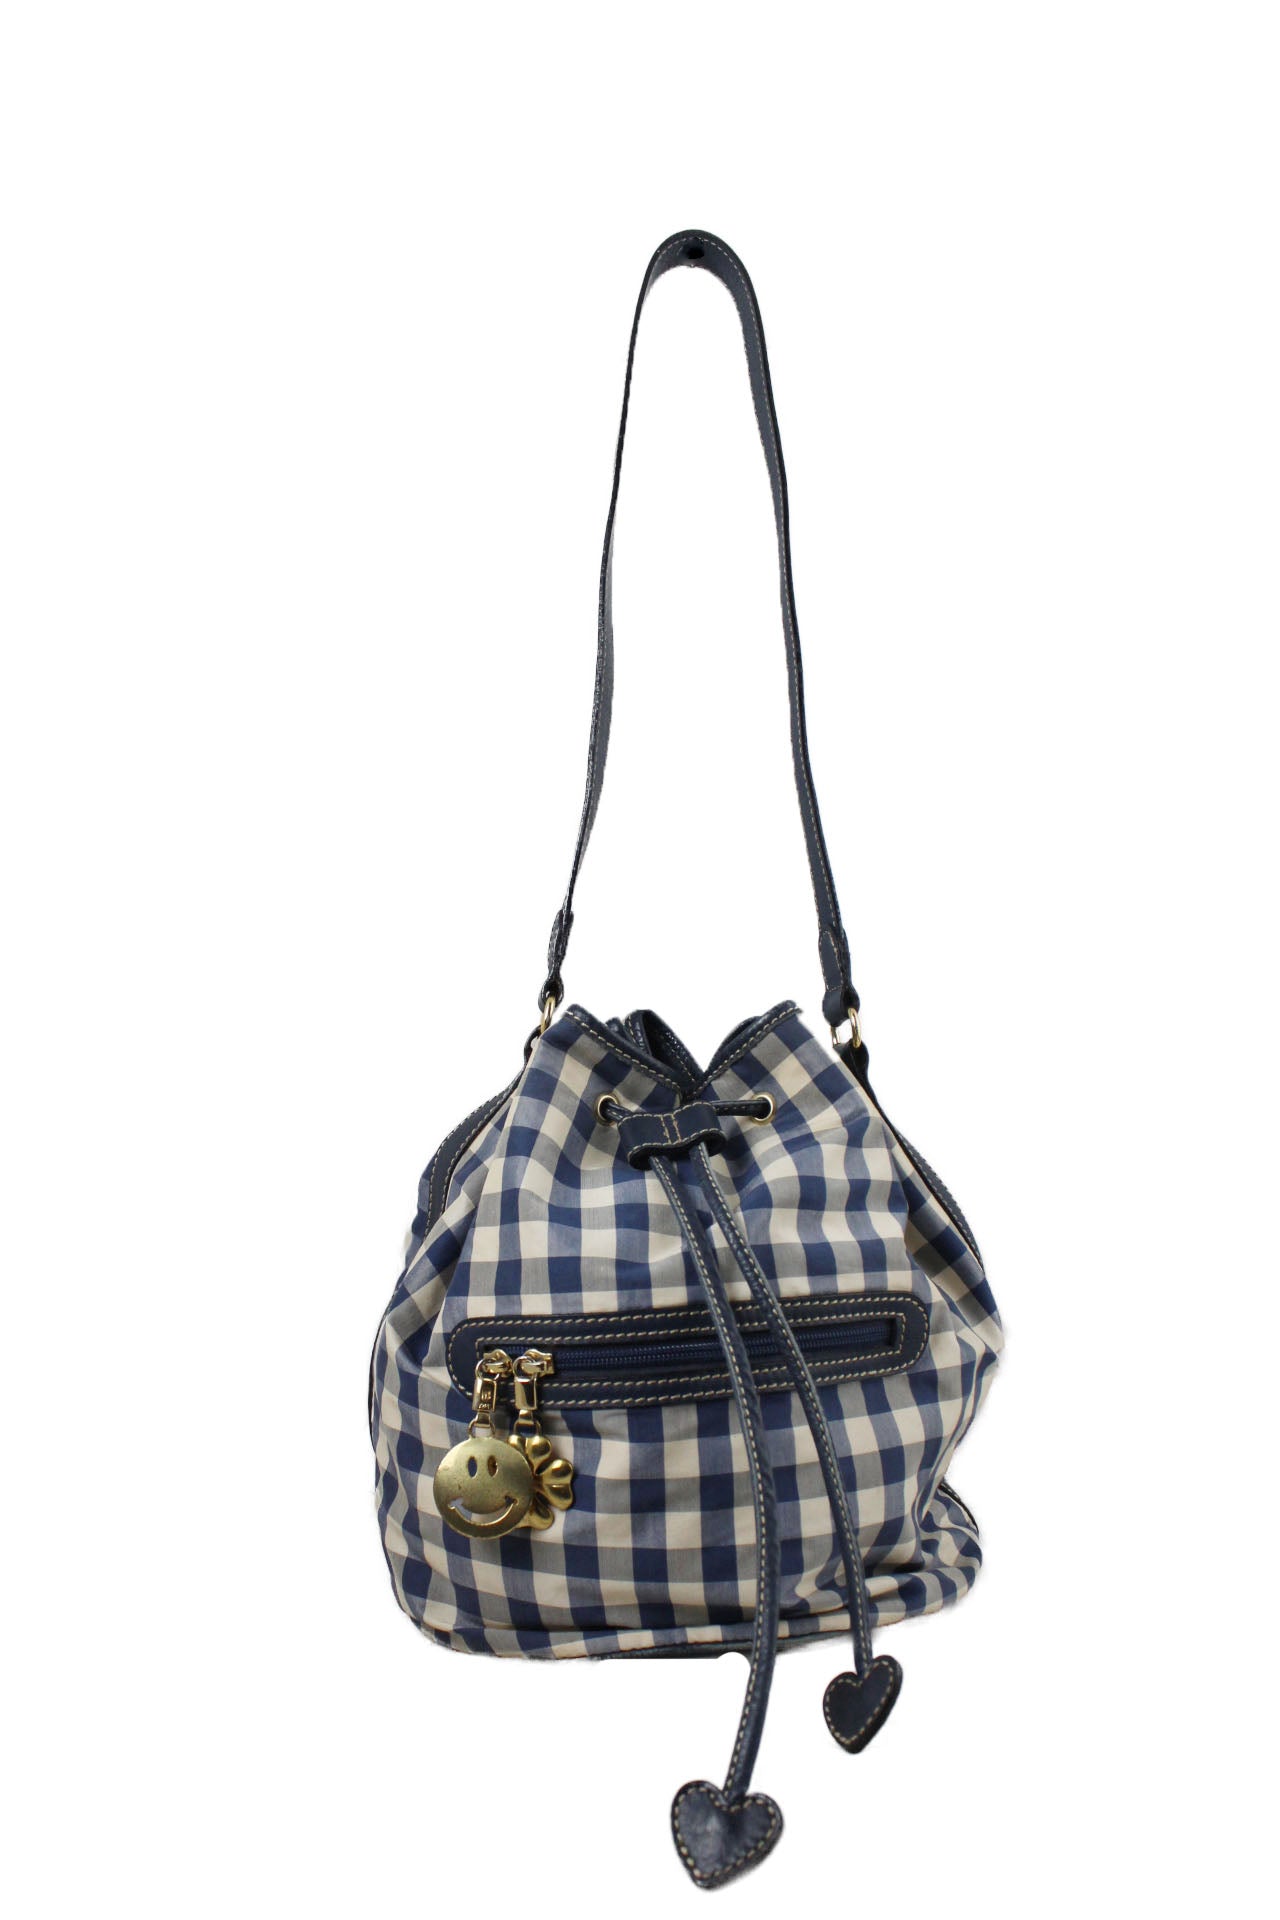 front of vintage moschino blue and white plaid bucket bag. features plaid design throughout, gold tone hardware, four leaf clover and smiley shape pendant, zip pockets, and drawstring closure with heart shape at edges. 